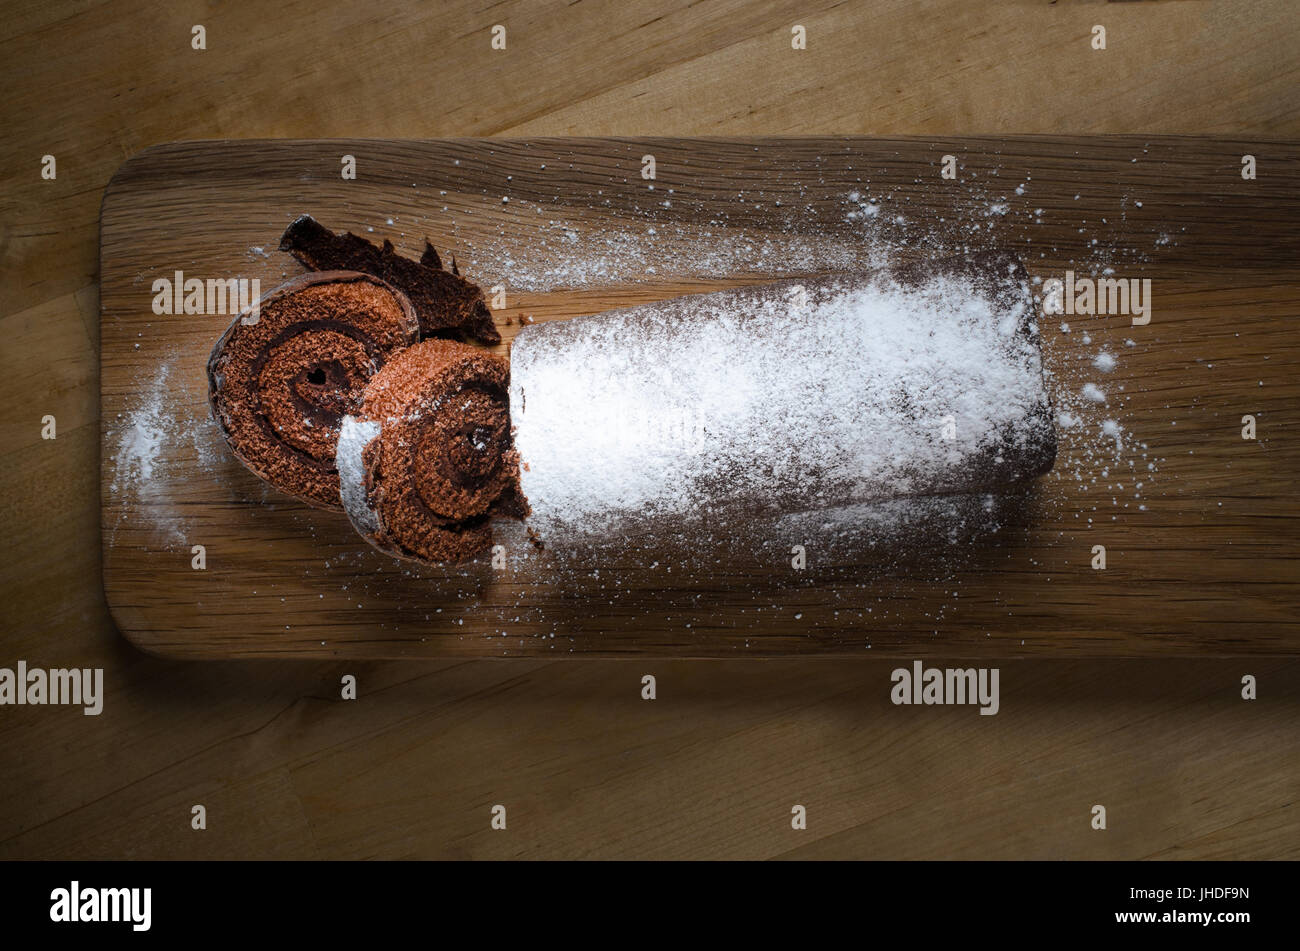 Overhead shot of a full length chocolate Christmas Yule Log or Swiss Roll cake, on long wooden paddle board, dusted with white icing sugar. Stock Photo